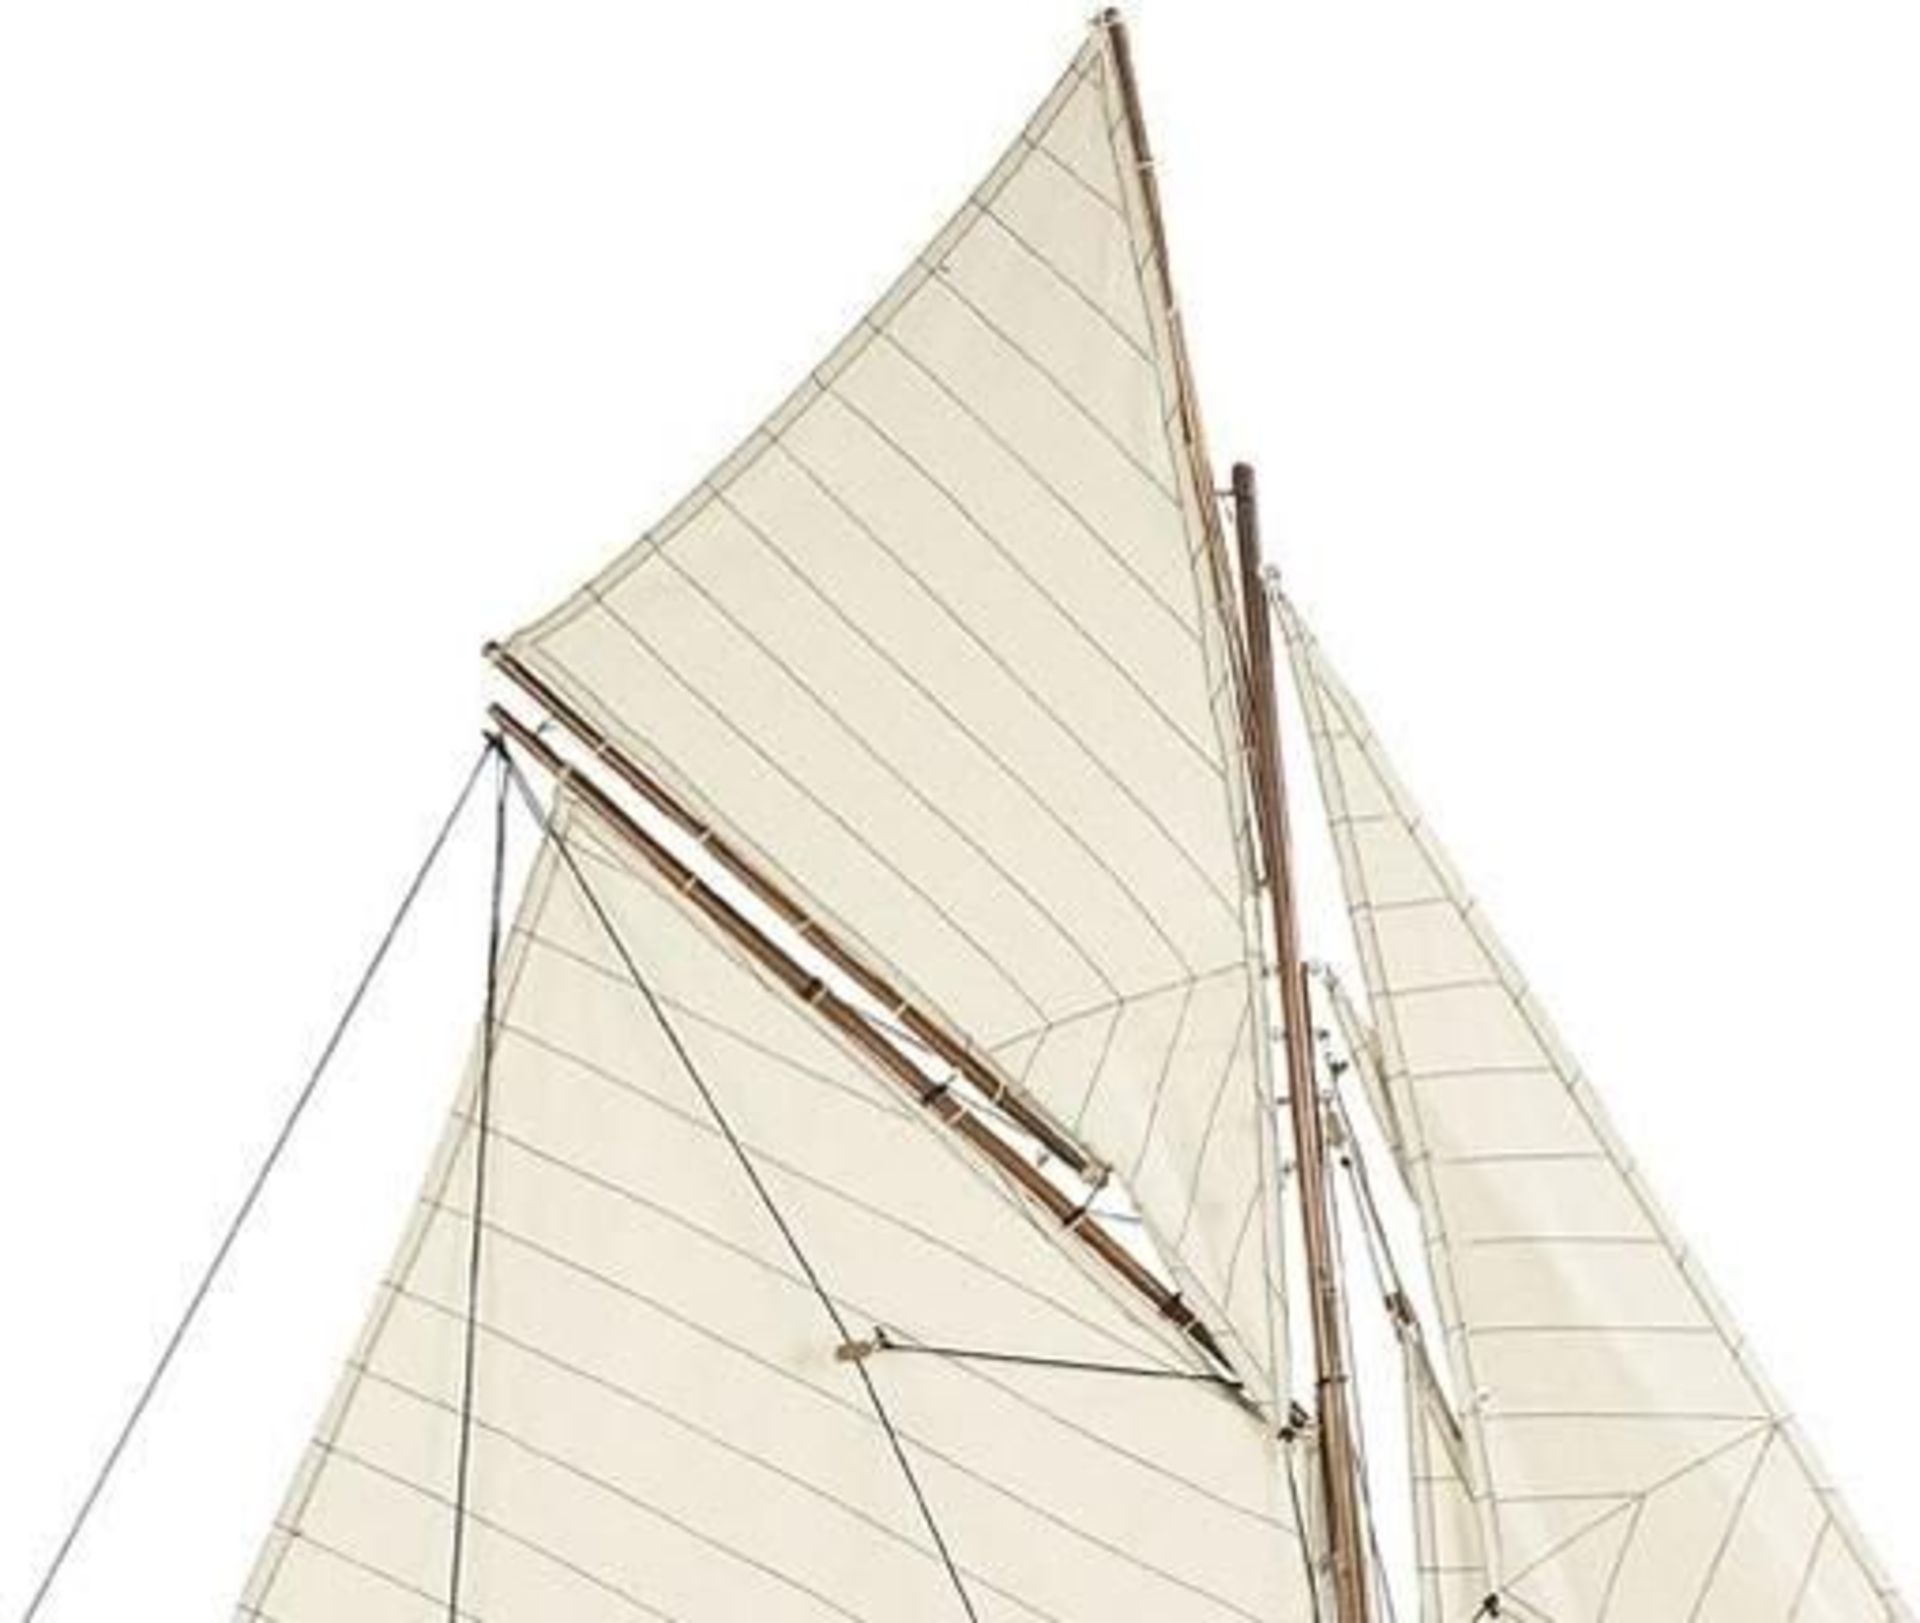 America's Cup Columbia 1901 Racing Yacht Detailed Scale Model - Image 6 of 7